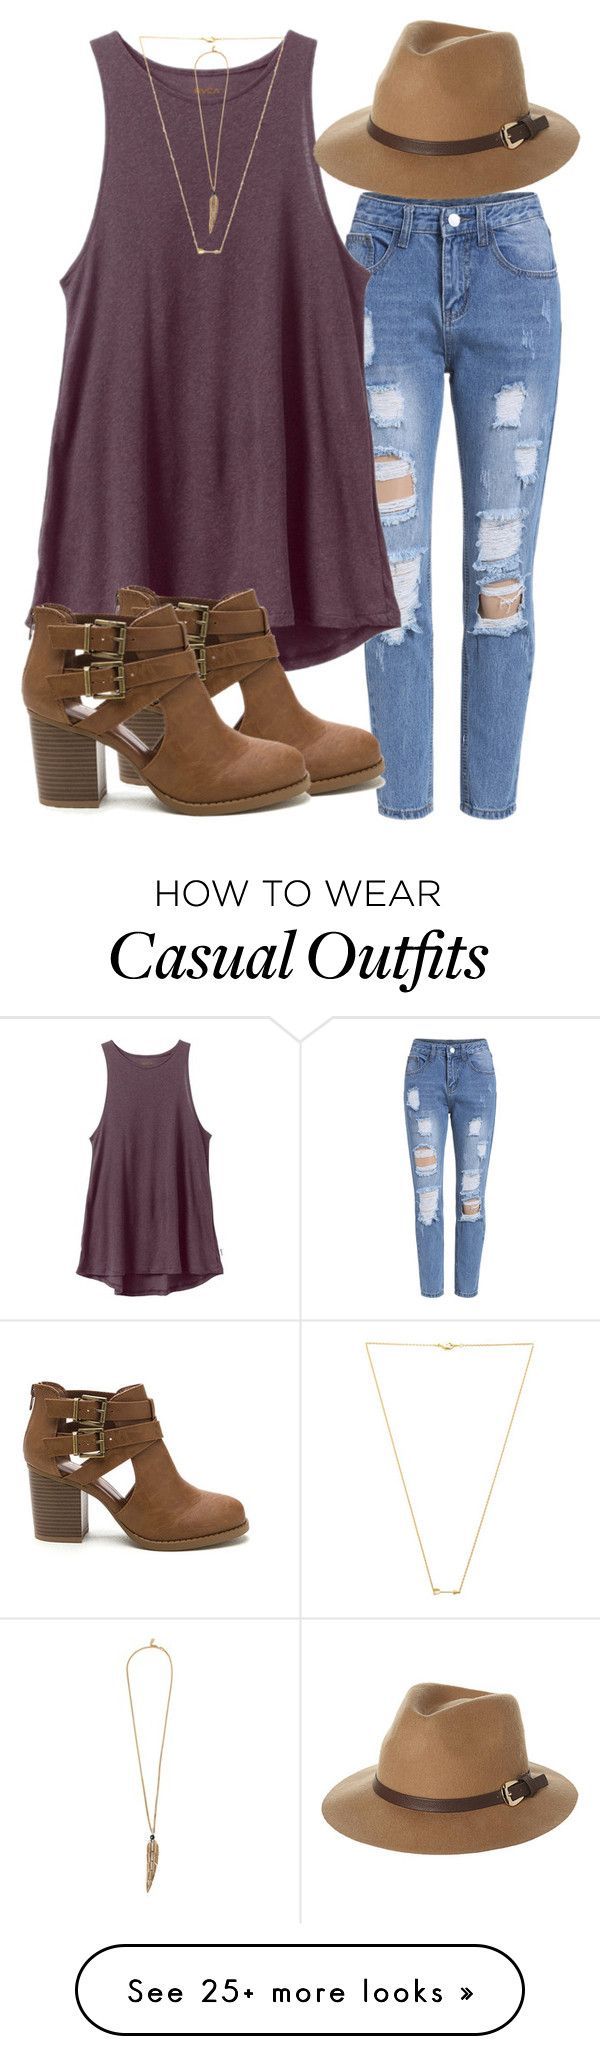 “Casual” by j2205 on Polyvore featuring RVCA, Rusty, Wanderlust + Co, Roberto Cavalli, women’s clothing, w